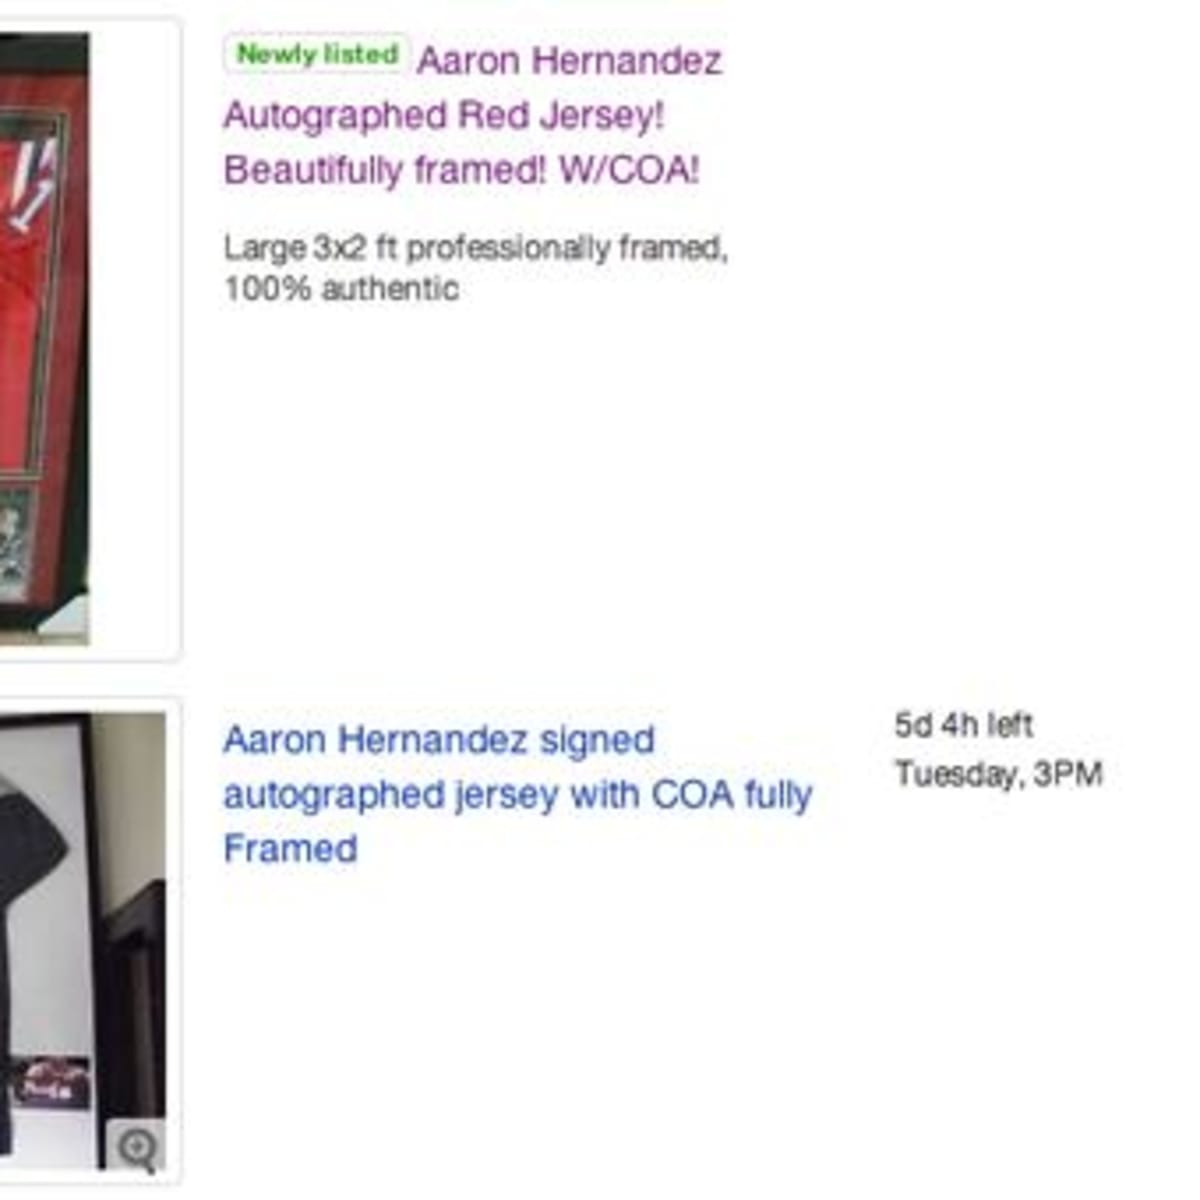 Aaron Hernandez jerseys are selling for $250 on